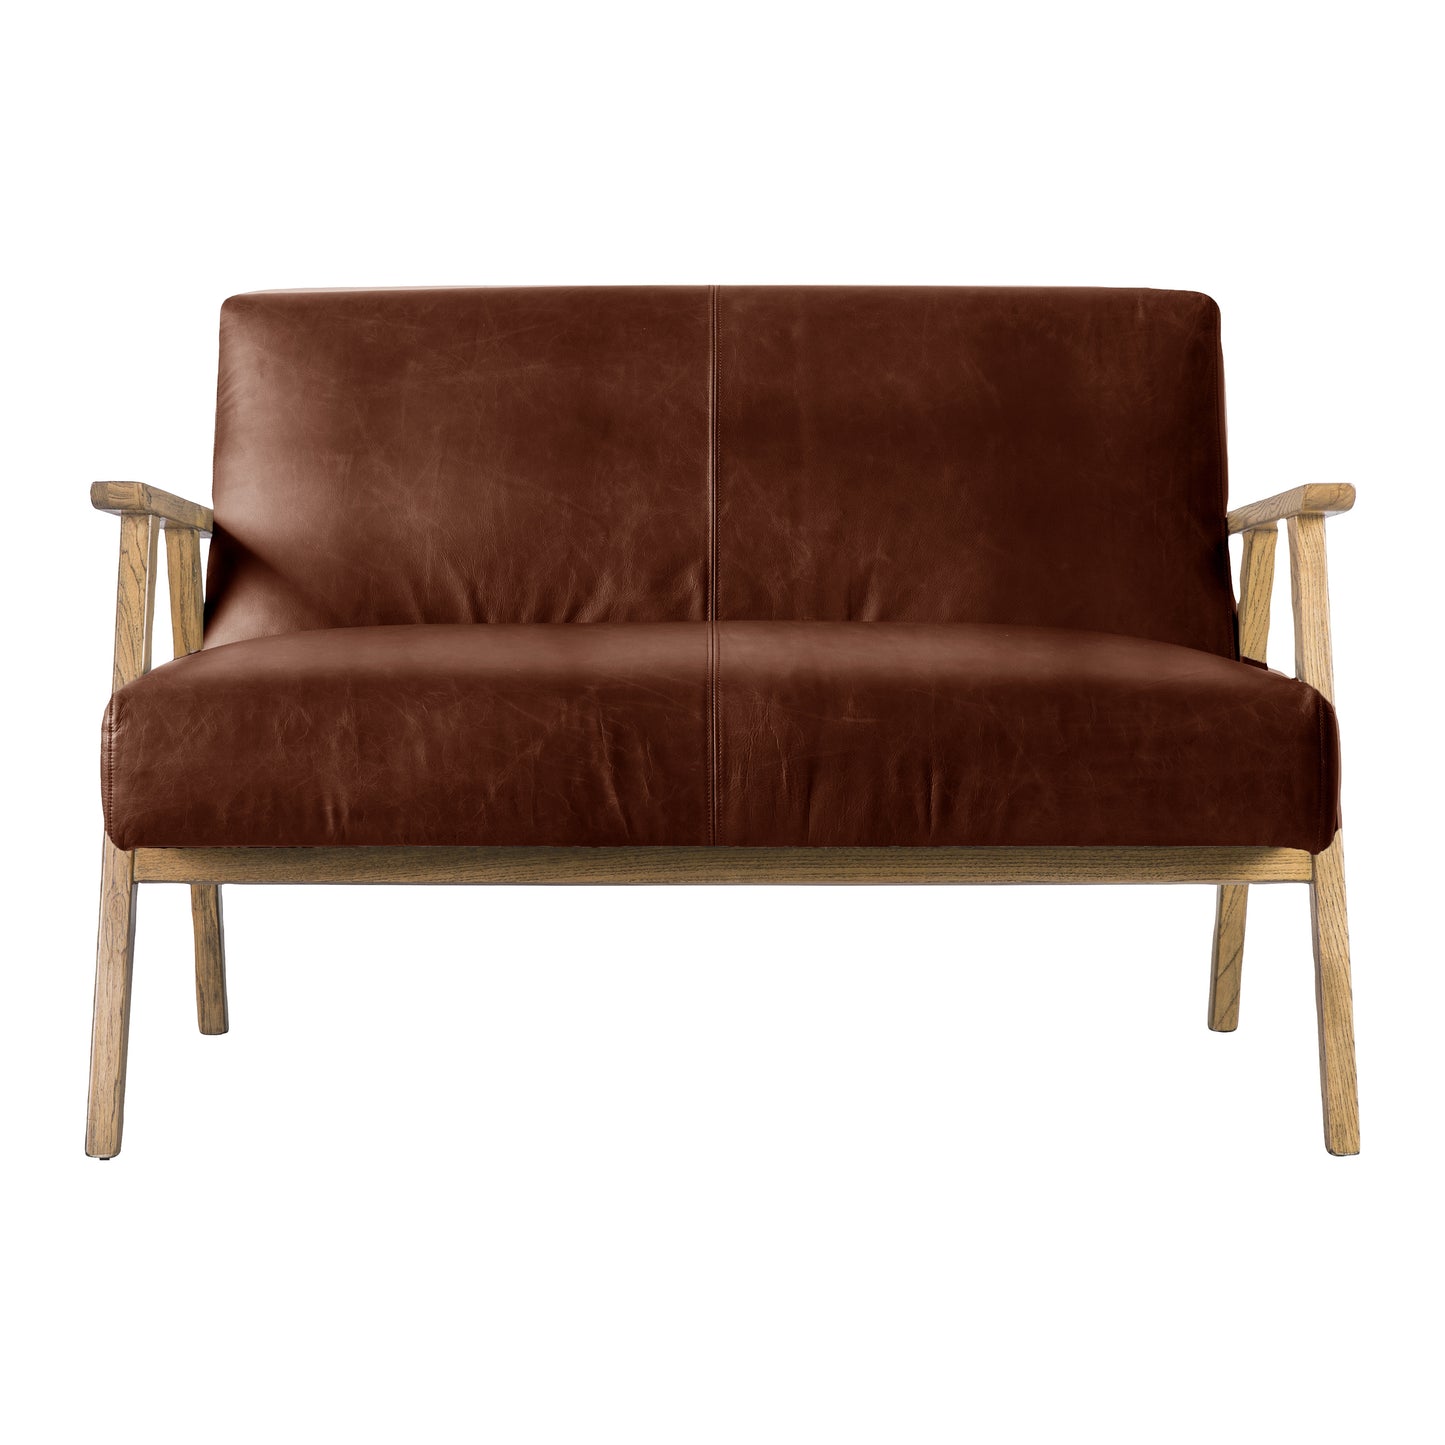 Denver 2 Seater Sofa - Brown Leather